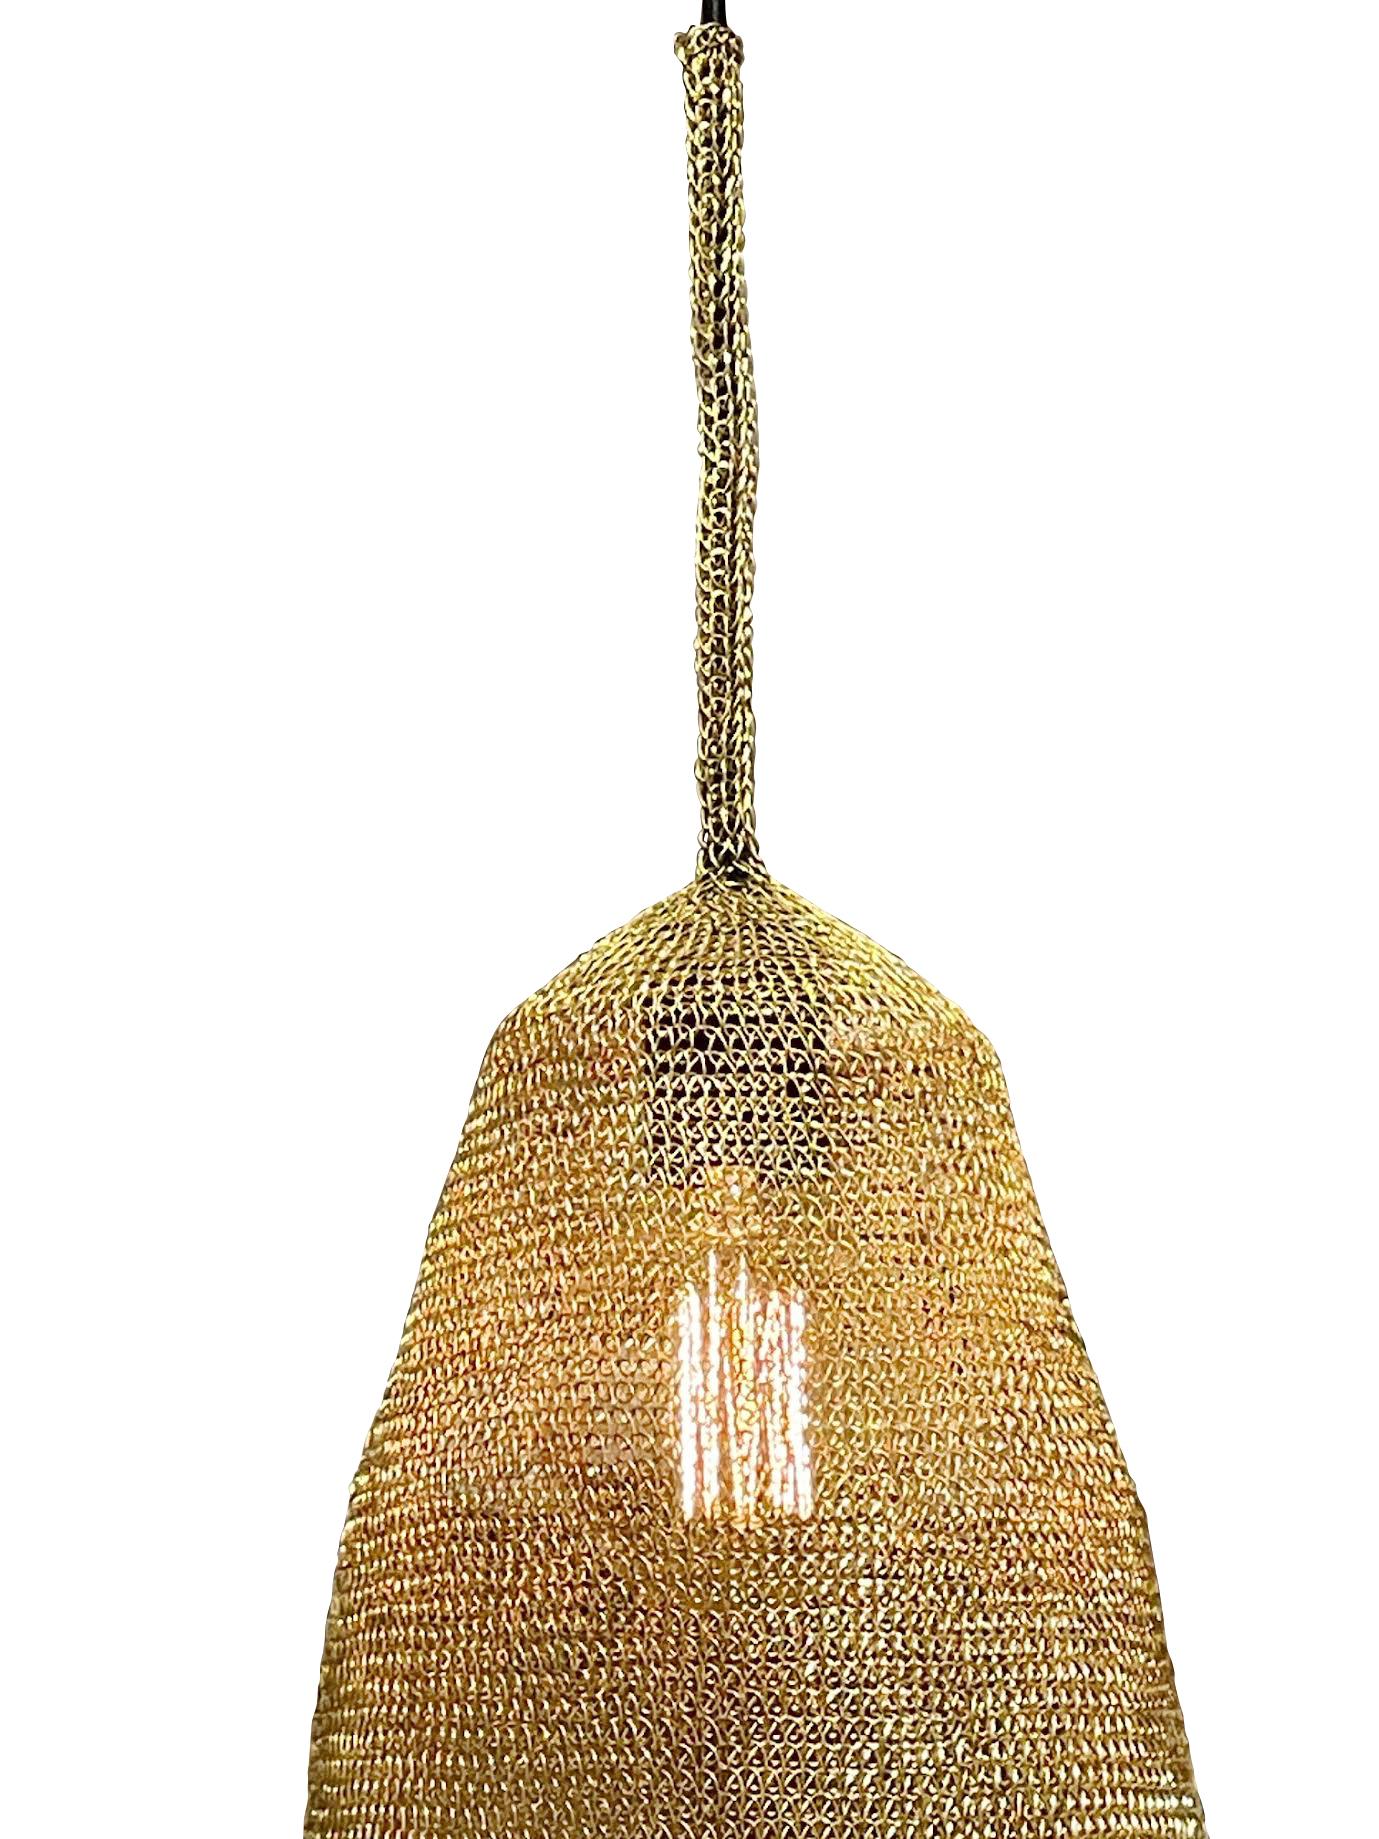 Contemporary Botswana knitted steel mesh pendant.
Brass color.
Black metal cap and cord  72